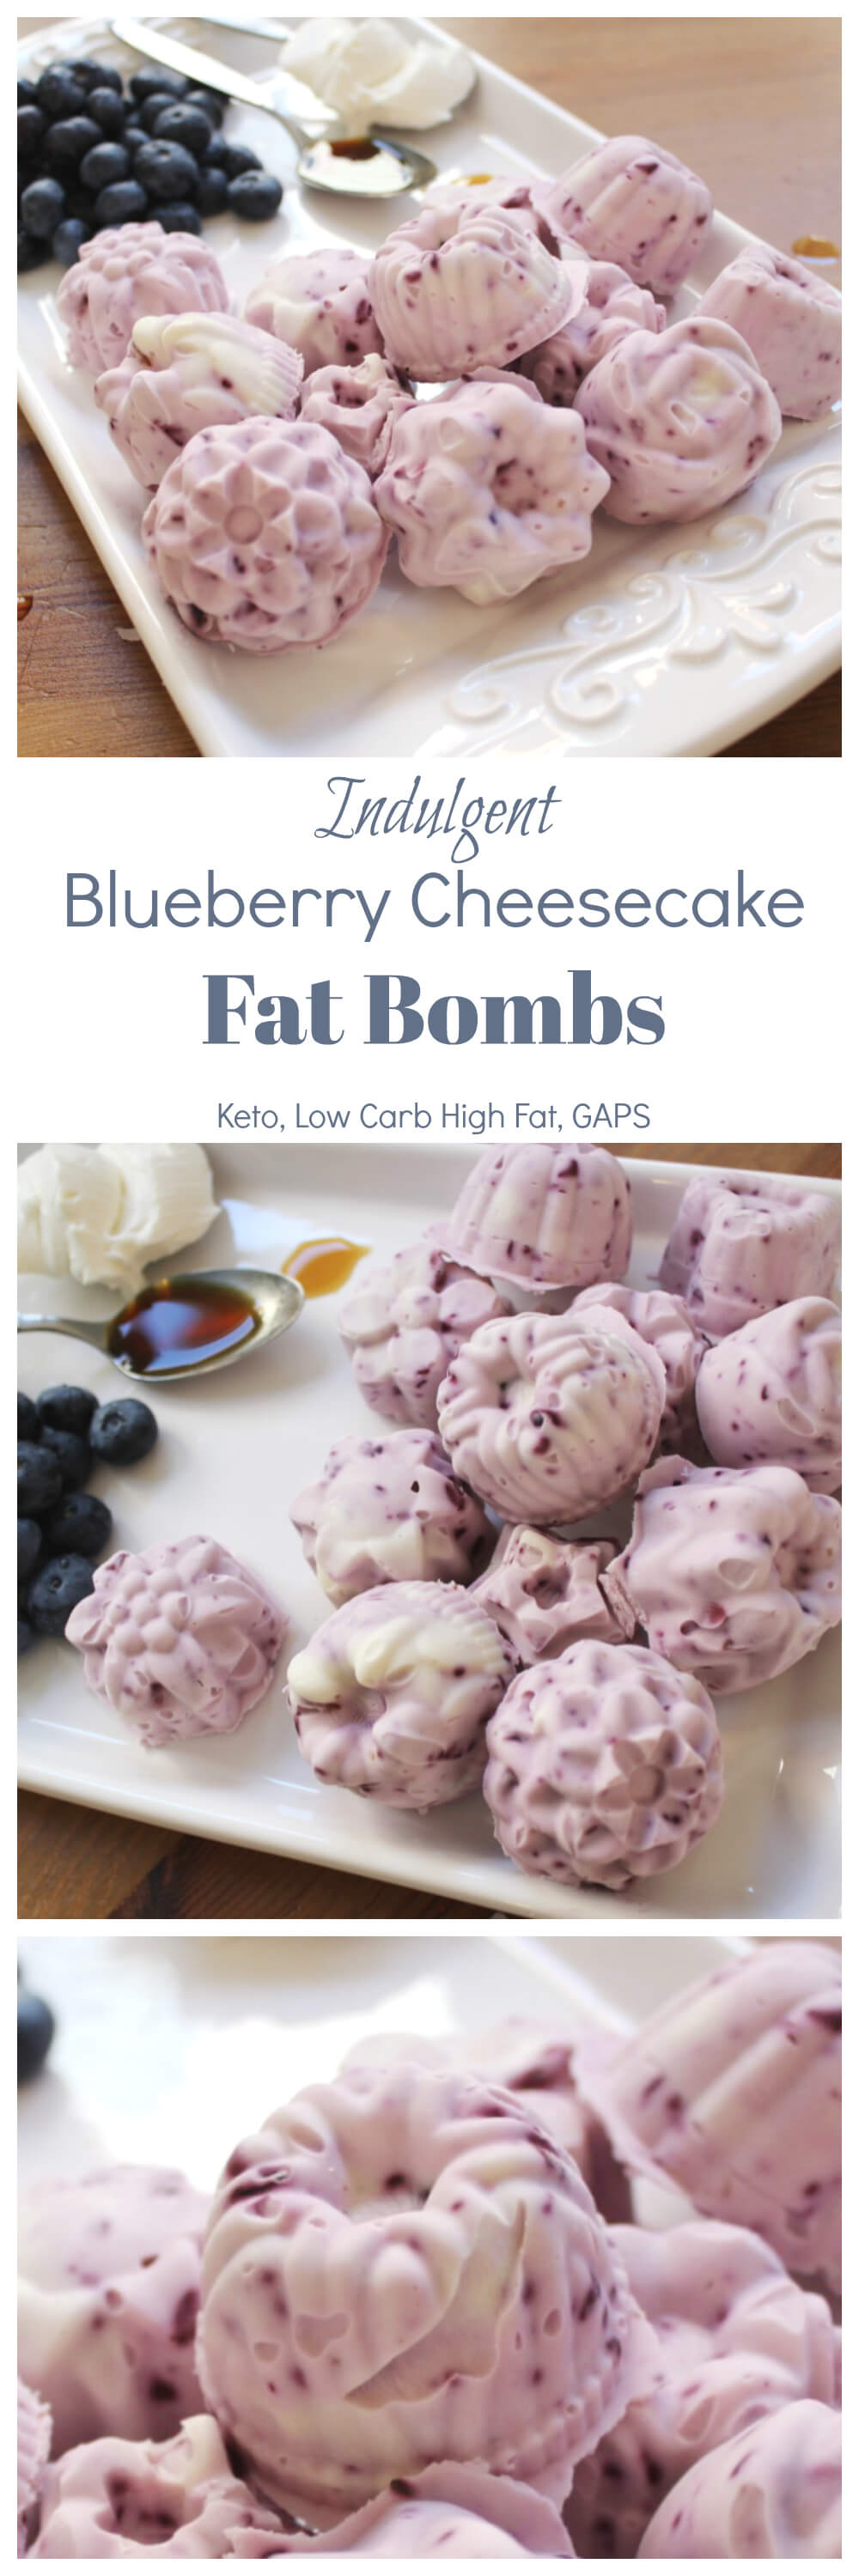 keto Blueberry Cheesecake Fat Bombs on a white tray with ingredients 